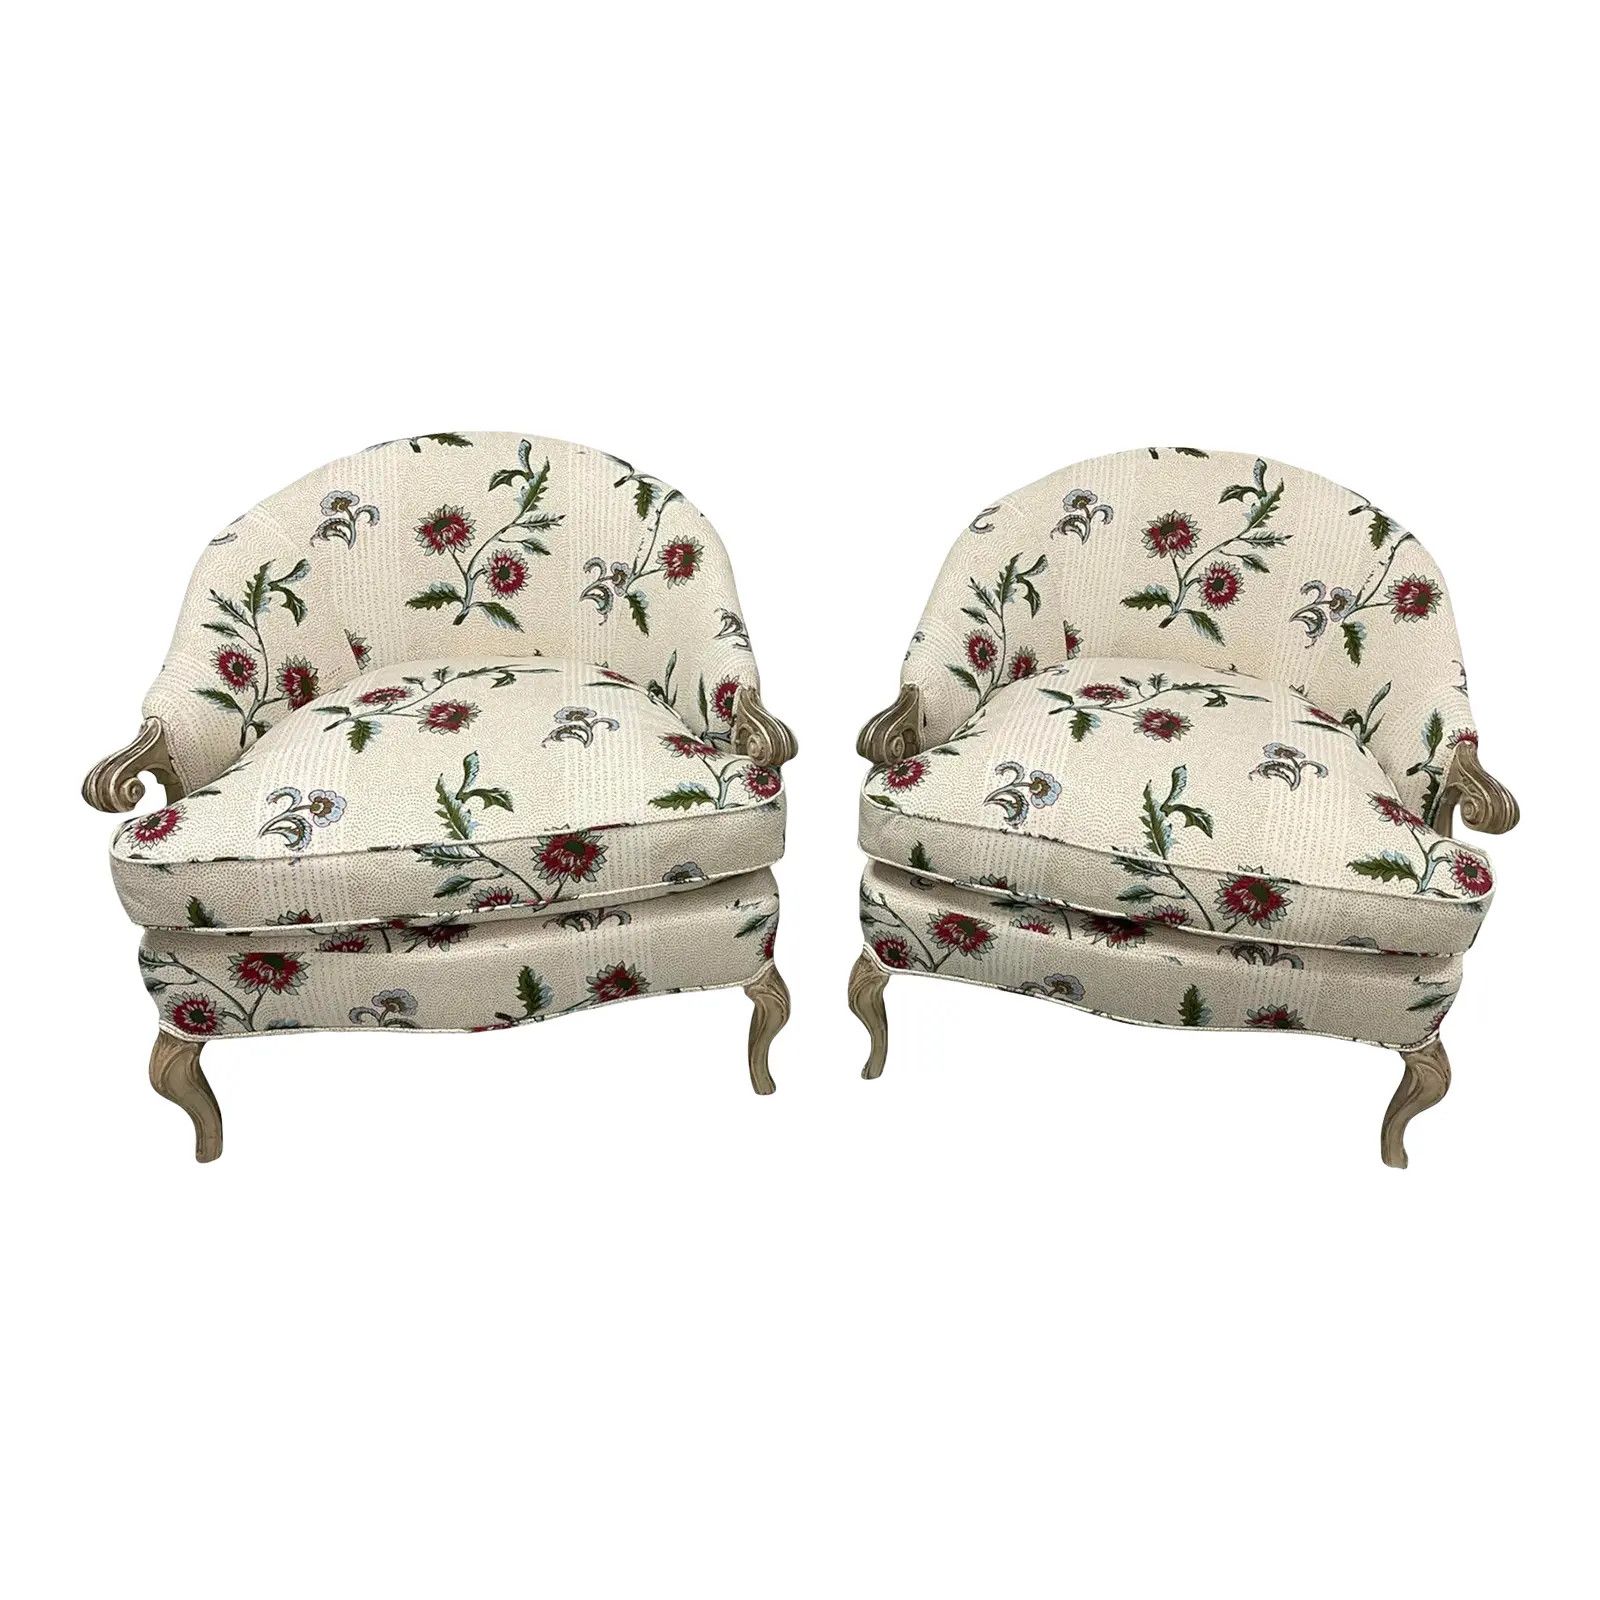 Sister Parish Curved Back Cabriole Leg Bergere Chairs | Chairish